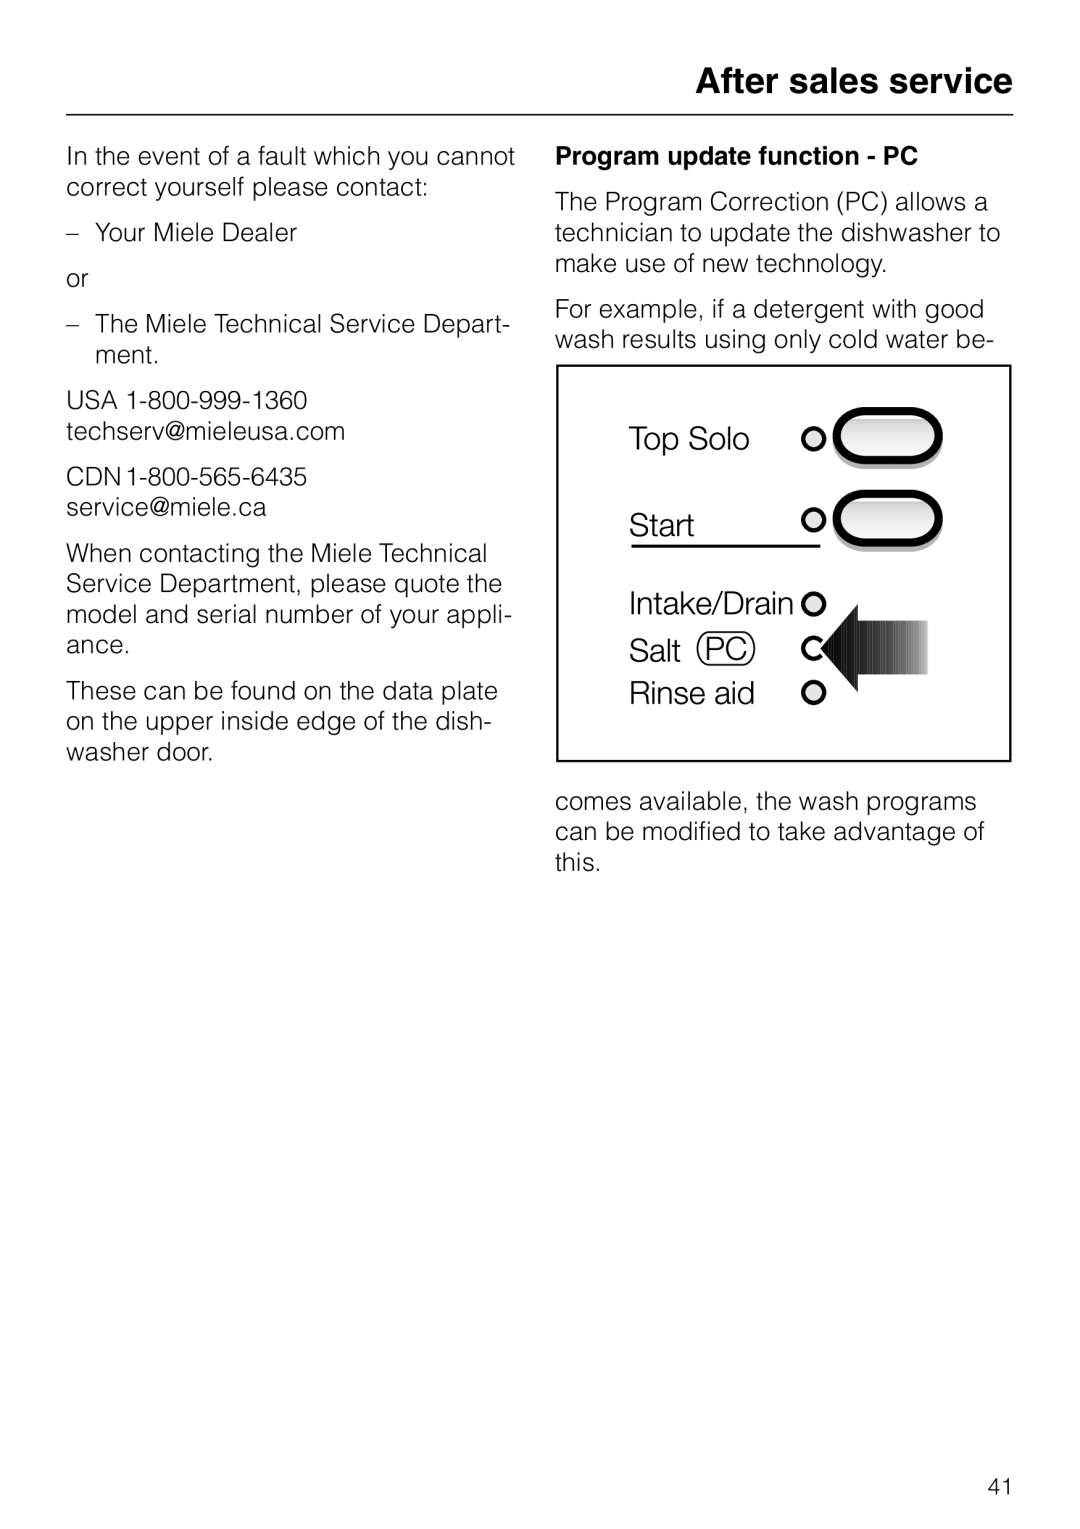 Miele G 851 operating instructions After sales service, Program update function - PC 